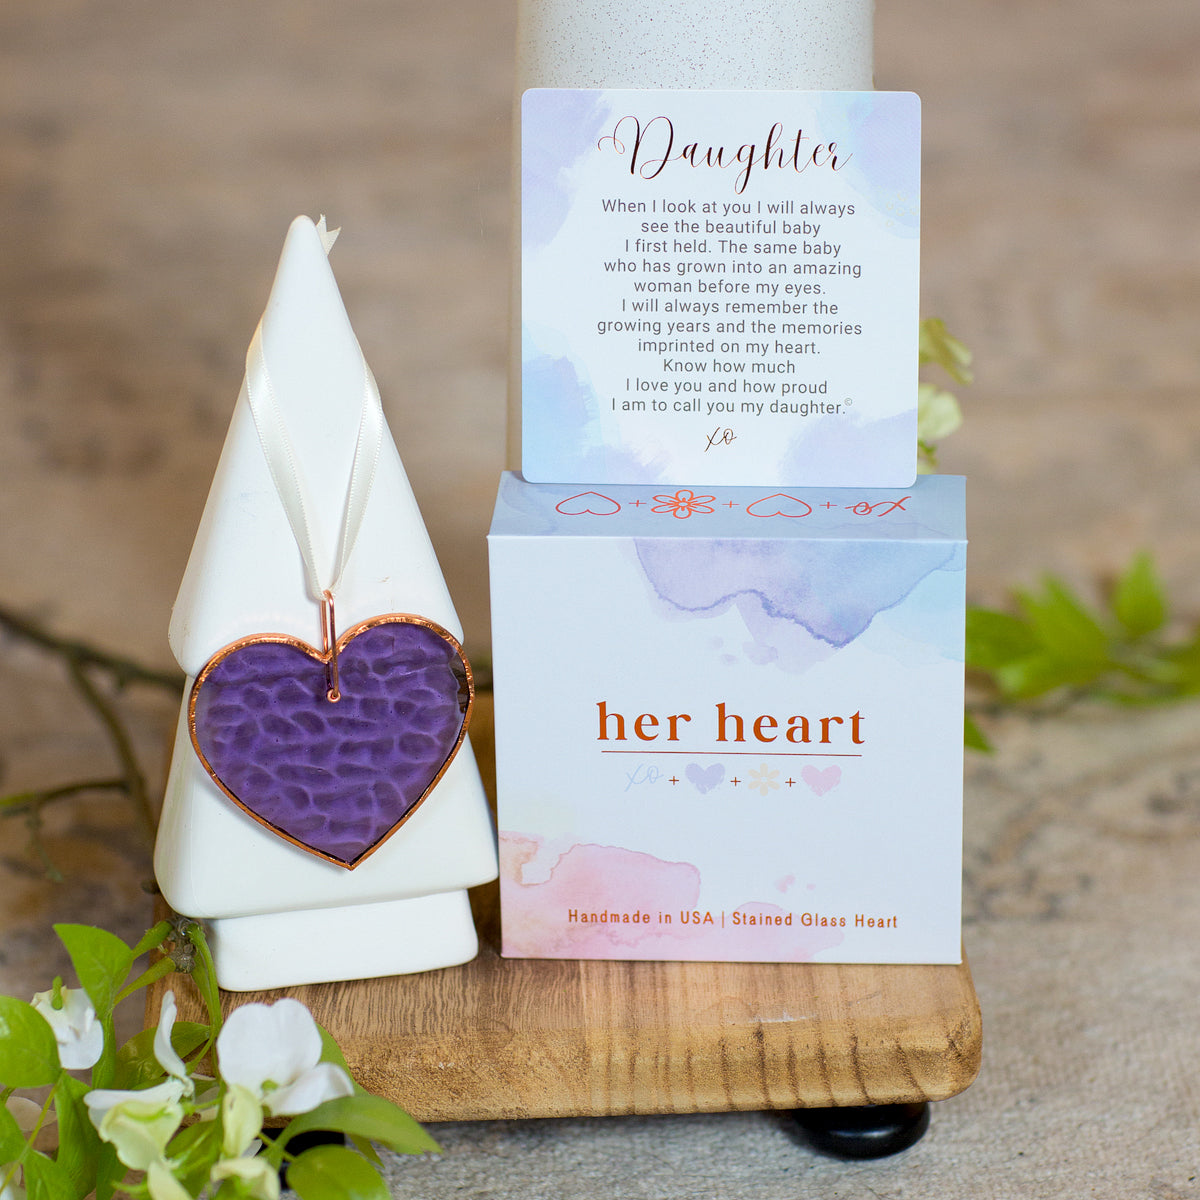 Her Heart for Daughter gift with box, sentiment card, and purple stain glass heart.